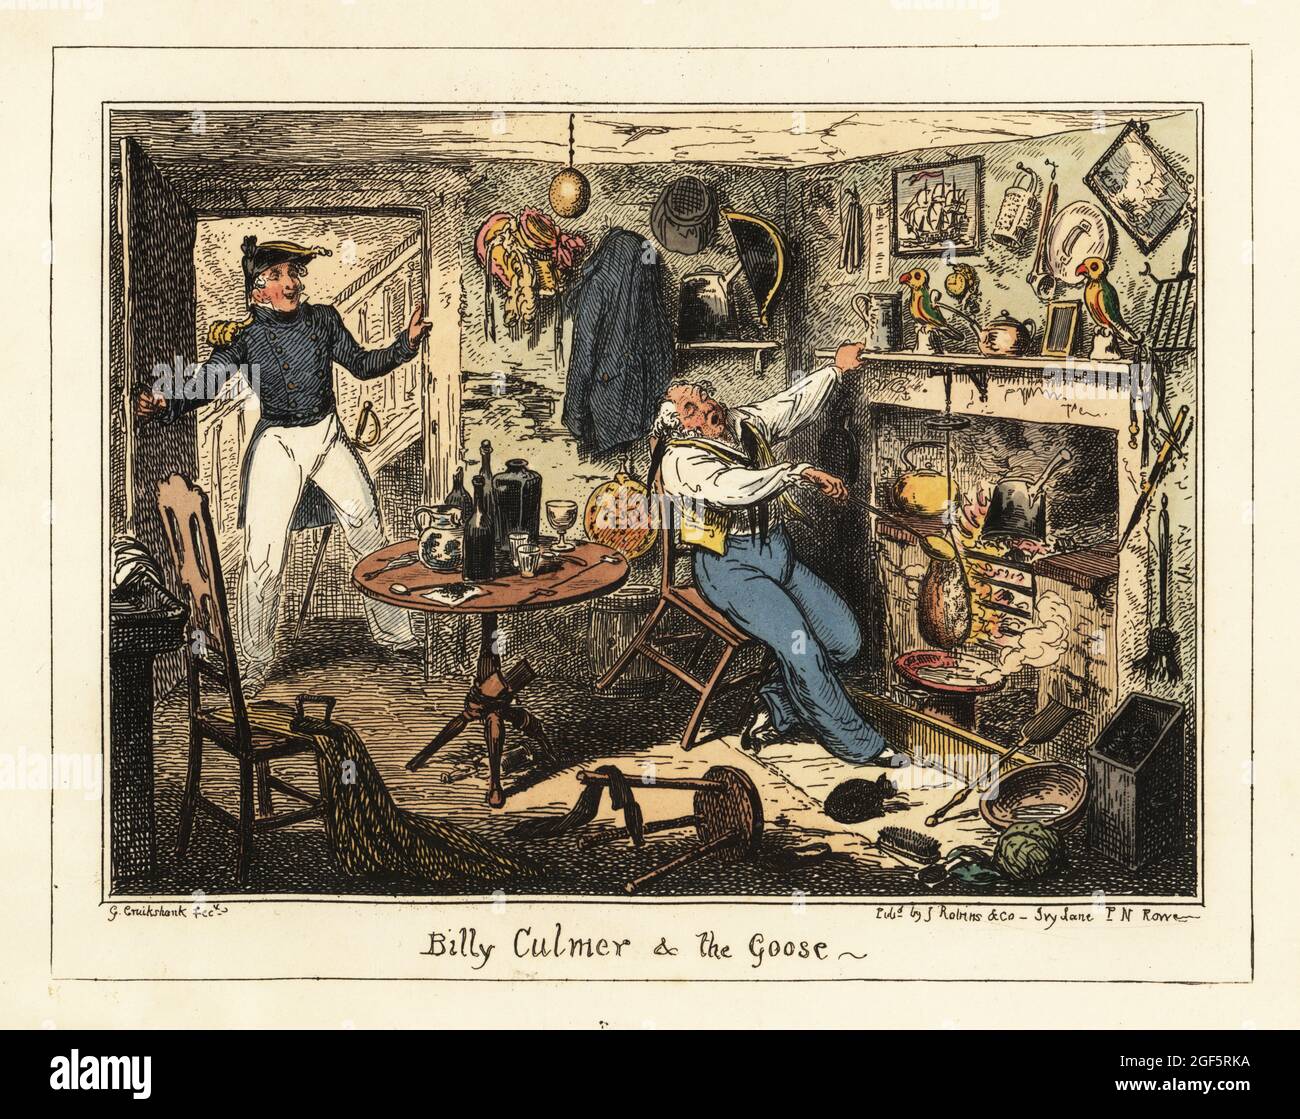 A naval lieutenant summons an old midshipman to duty, but he is too busy roasting a goose at the hearth. On the walls, a midshipman's dirk, paintings of ships, carved parrots, a cocked hat. Billy Culmer and the Goose. Handcoloured lithograph by George Cruikshank from Greenwich Hospital, a Series of Naval Sketches, by An Old Sailor (Matthew H. Barker), published by James Robins, London, 1826. Stock Photo